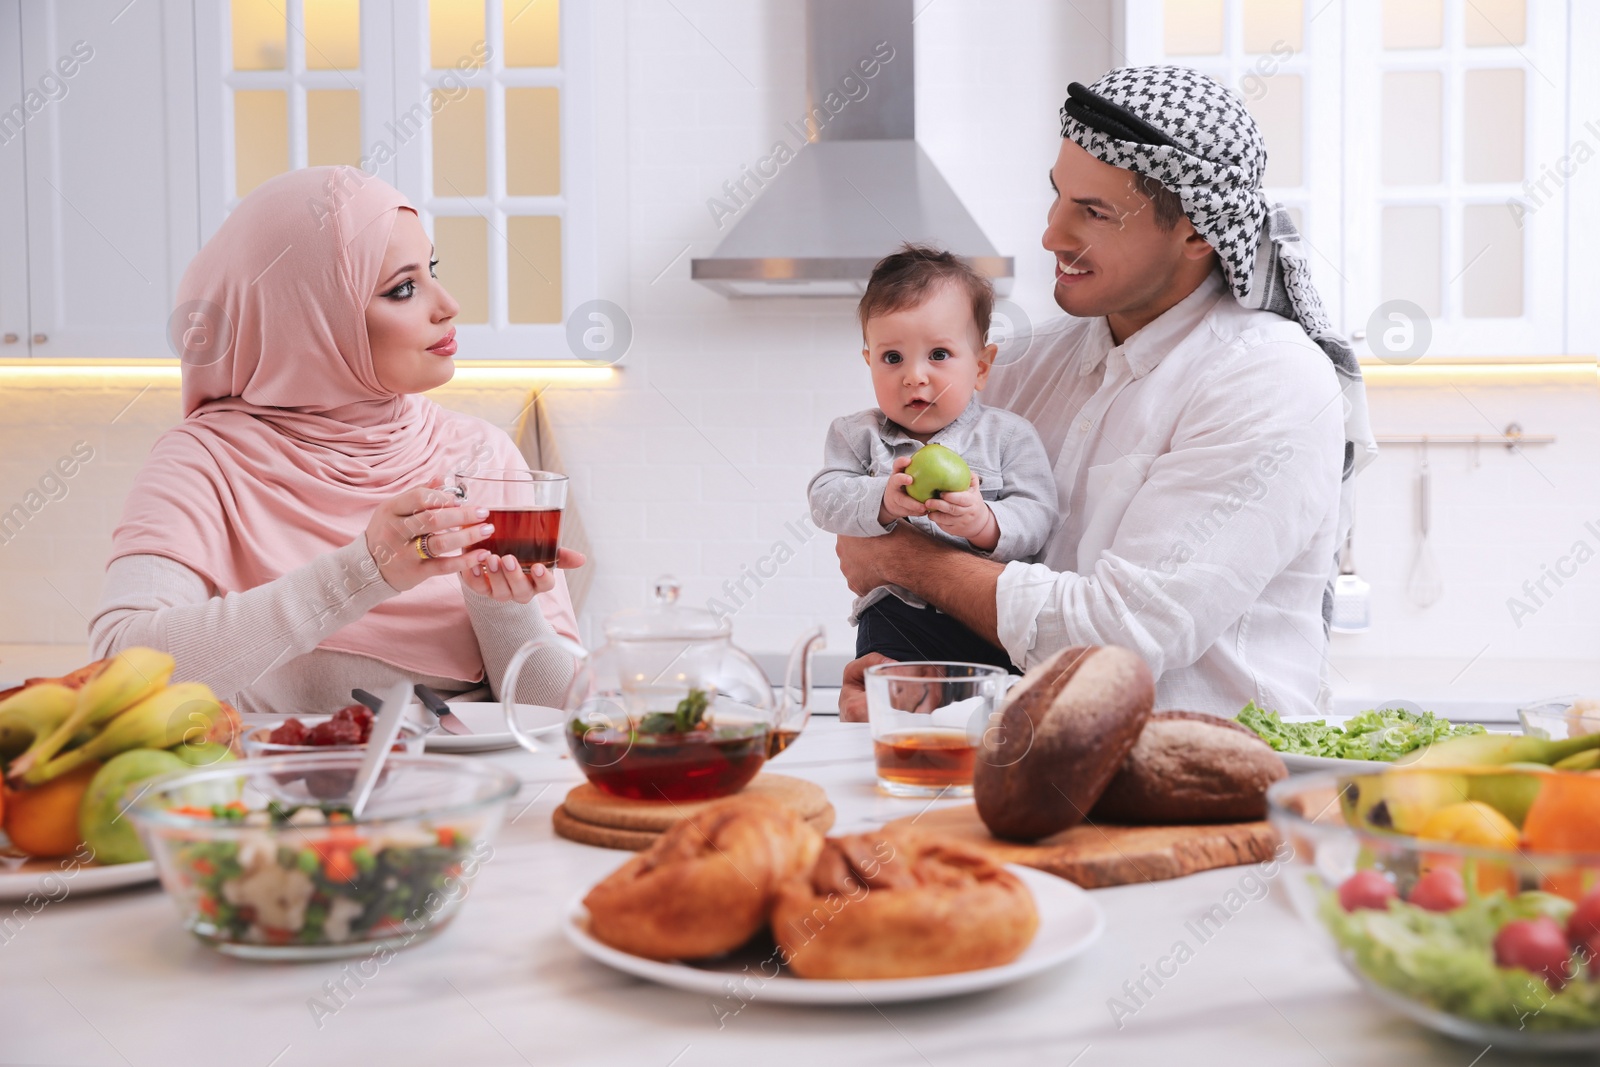 Photo of Happy Muslim family with little son at served table in kitchen